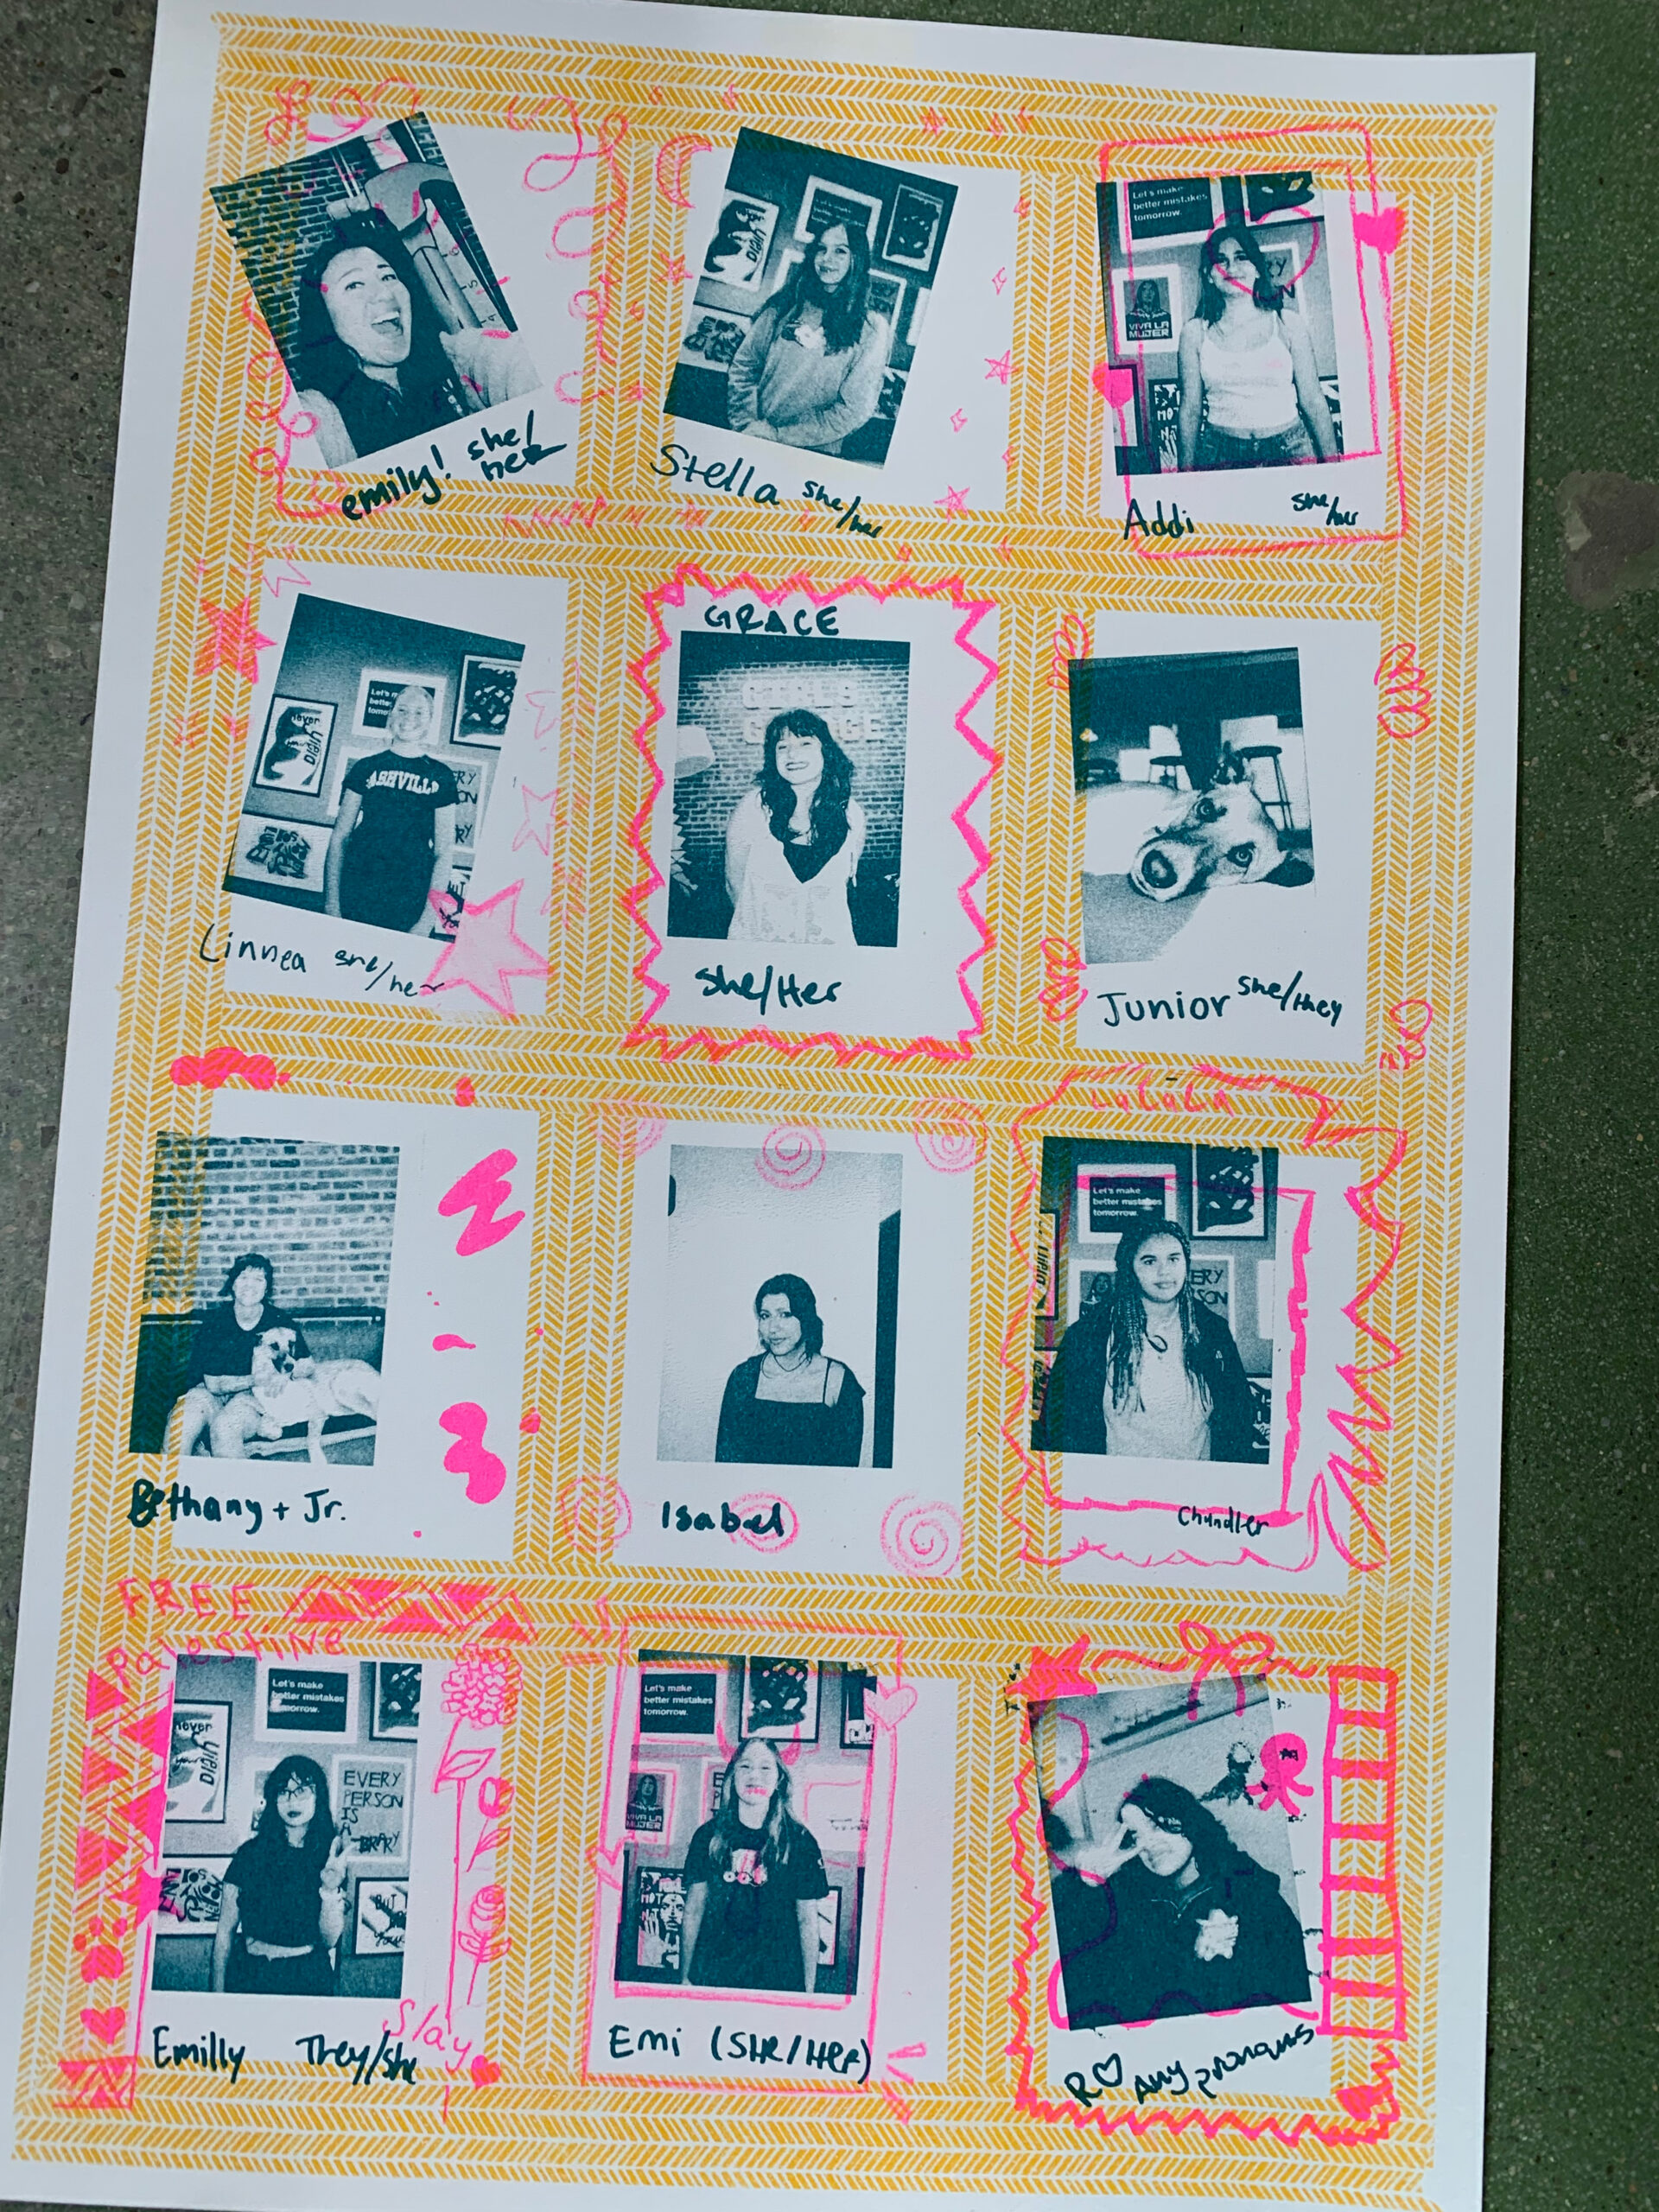 Risograph print, Protest + Print yearbook